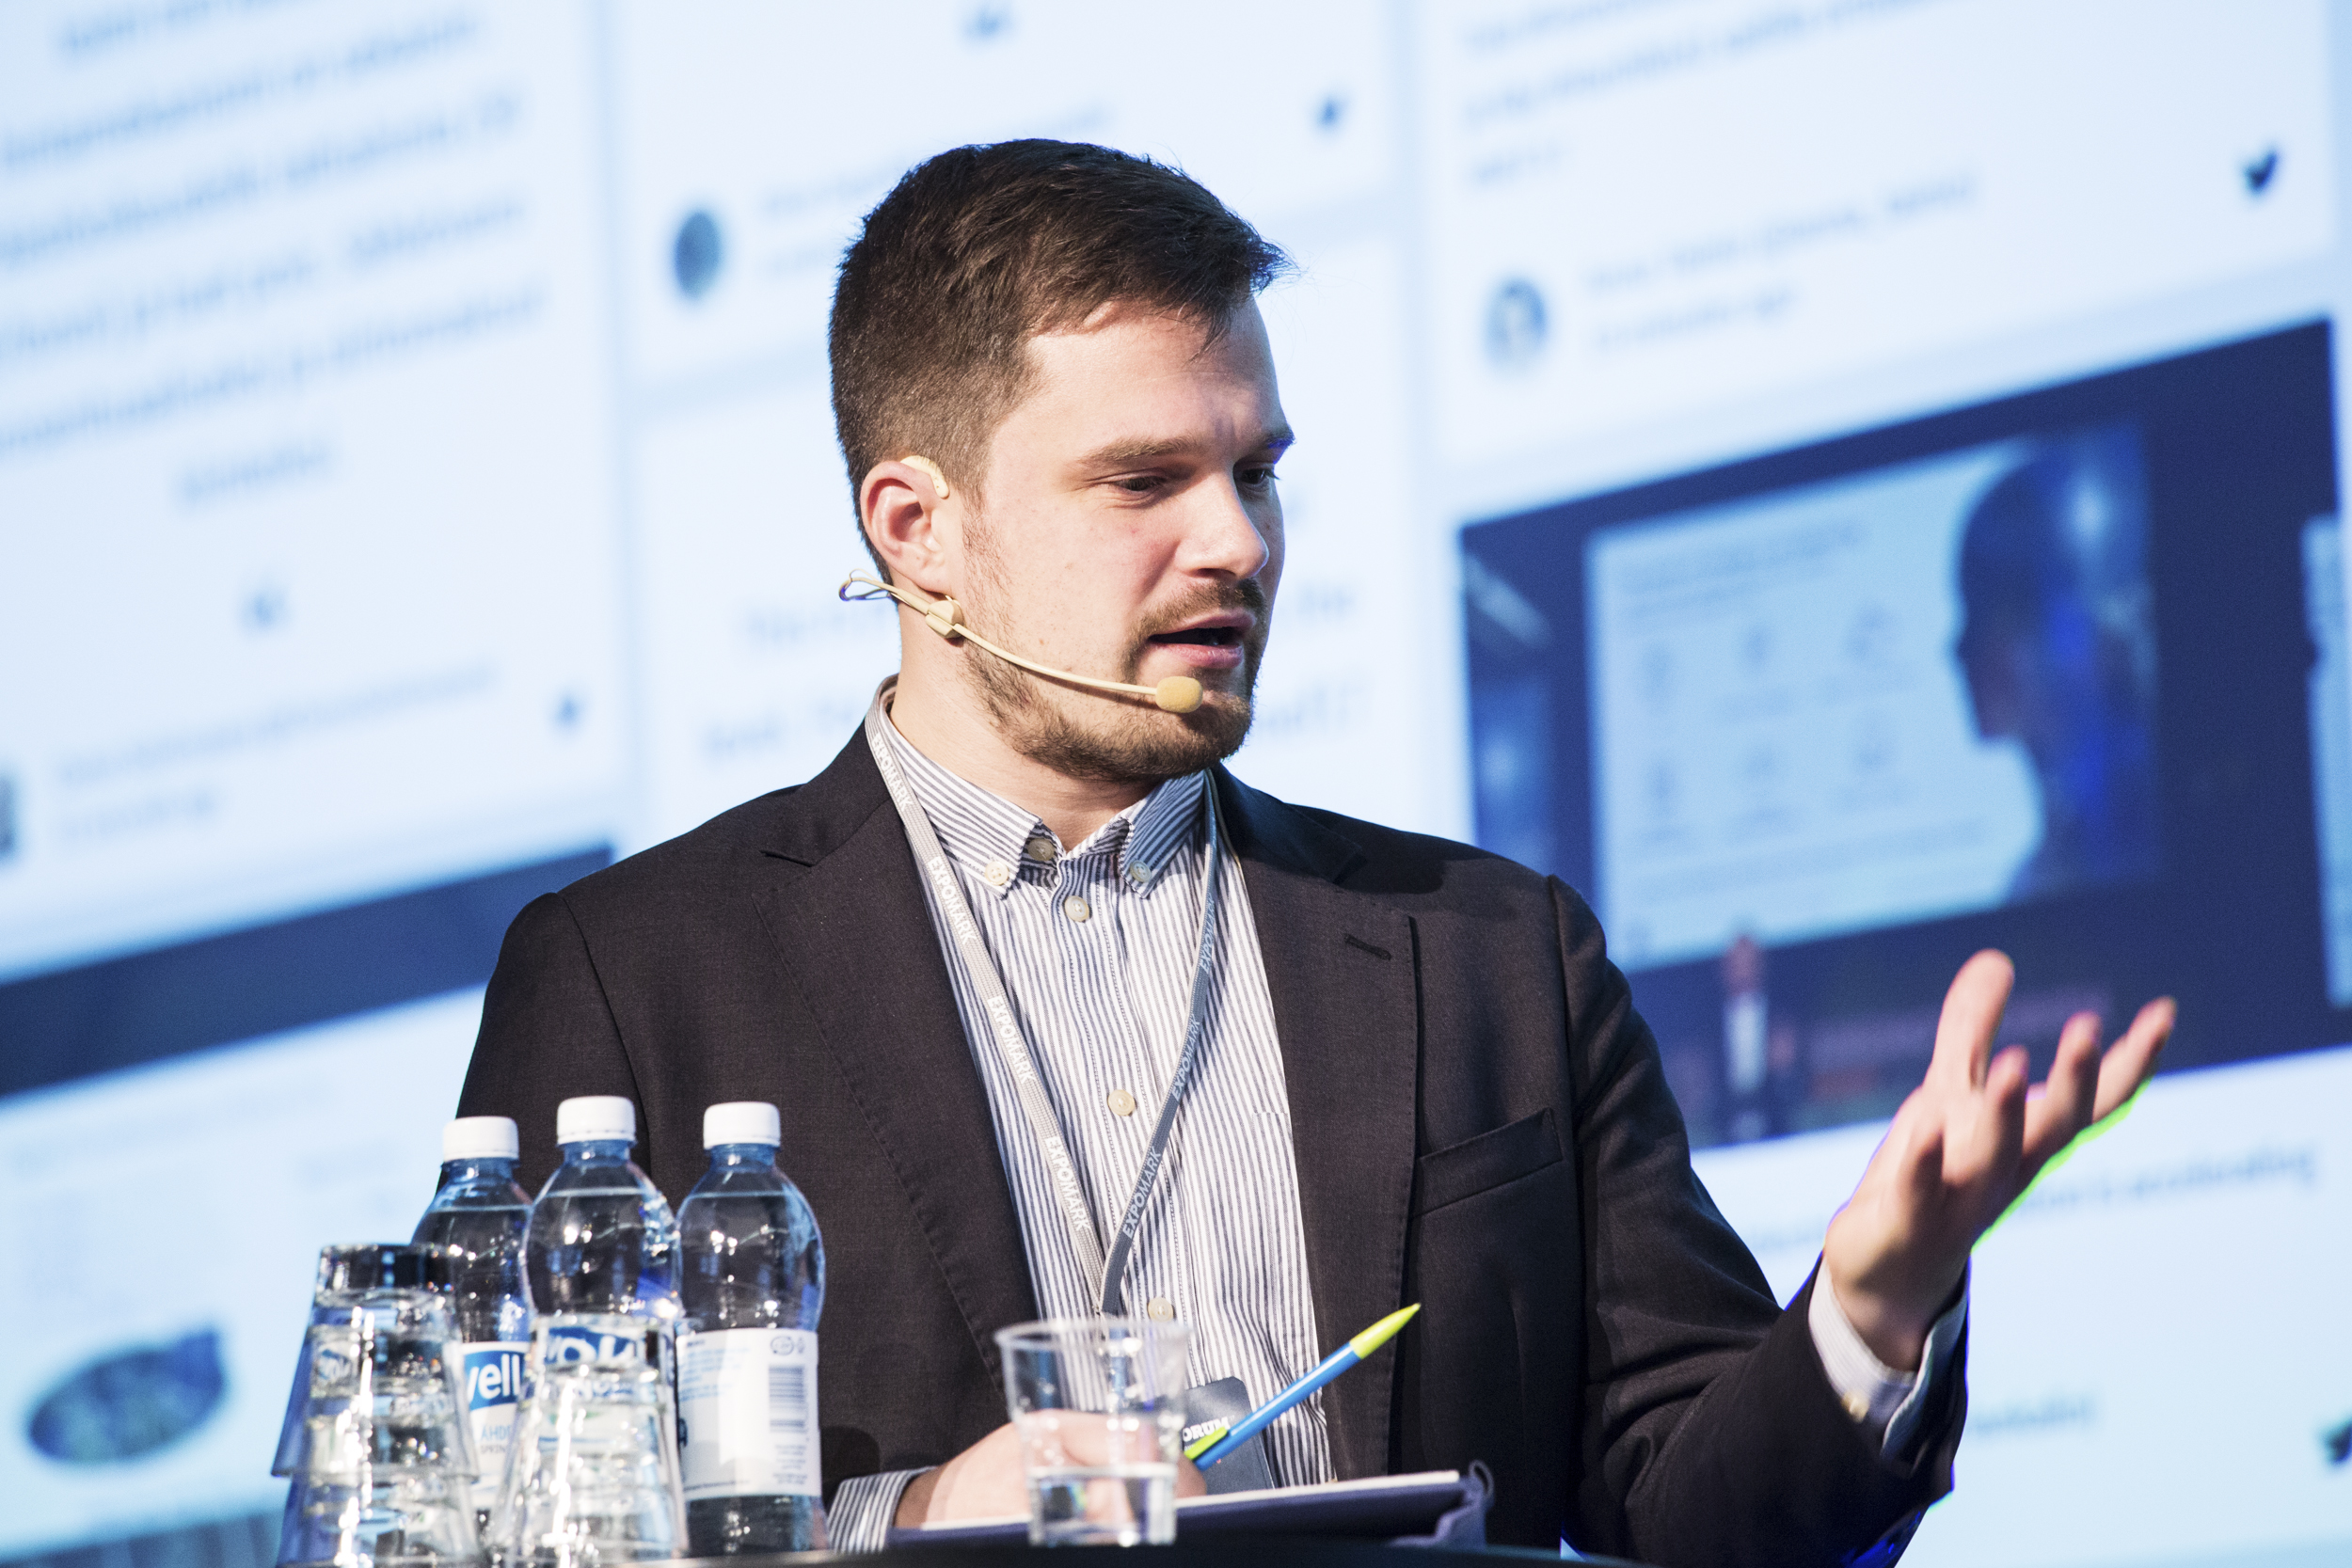 The future of energy debated at the Nordic Energy Forum2